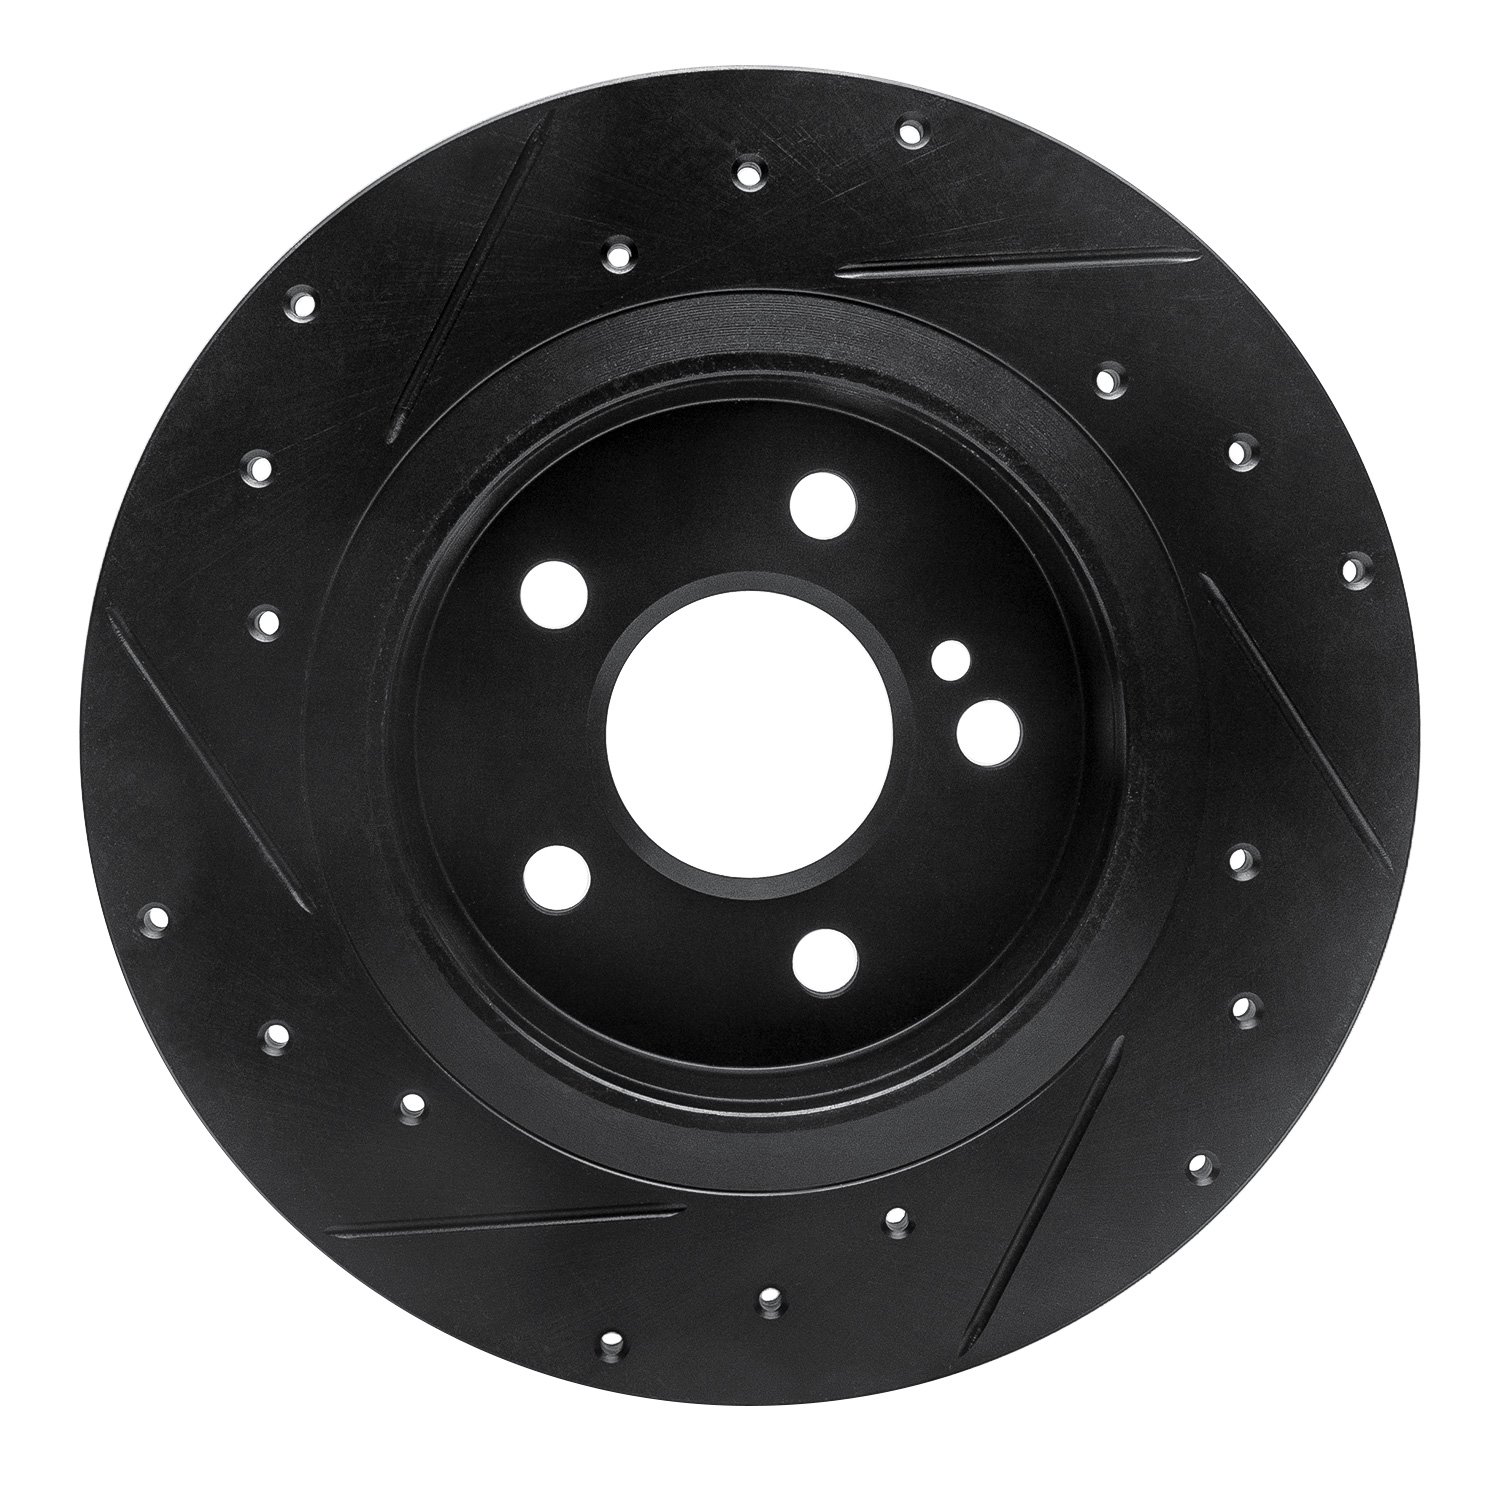 E-Line Drilled & Slotted Black Brake Rotor, 2014-2020 Fits Multiple Makes/Models, Position: Rear Right